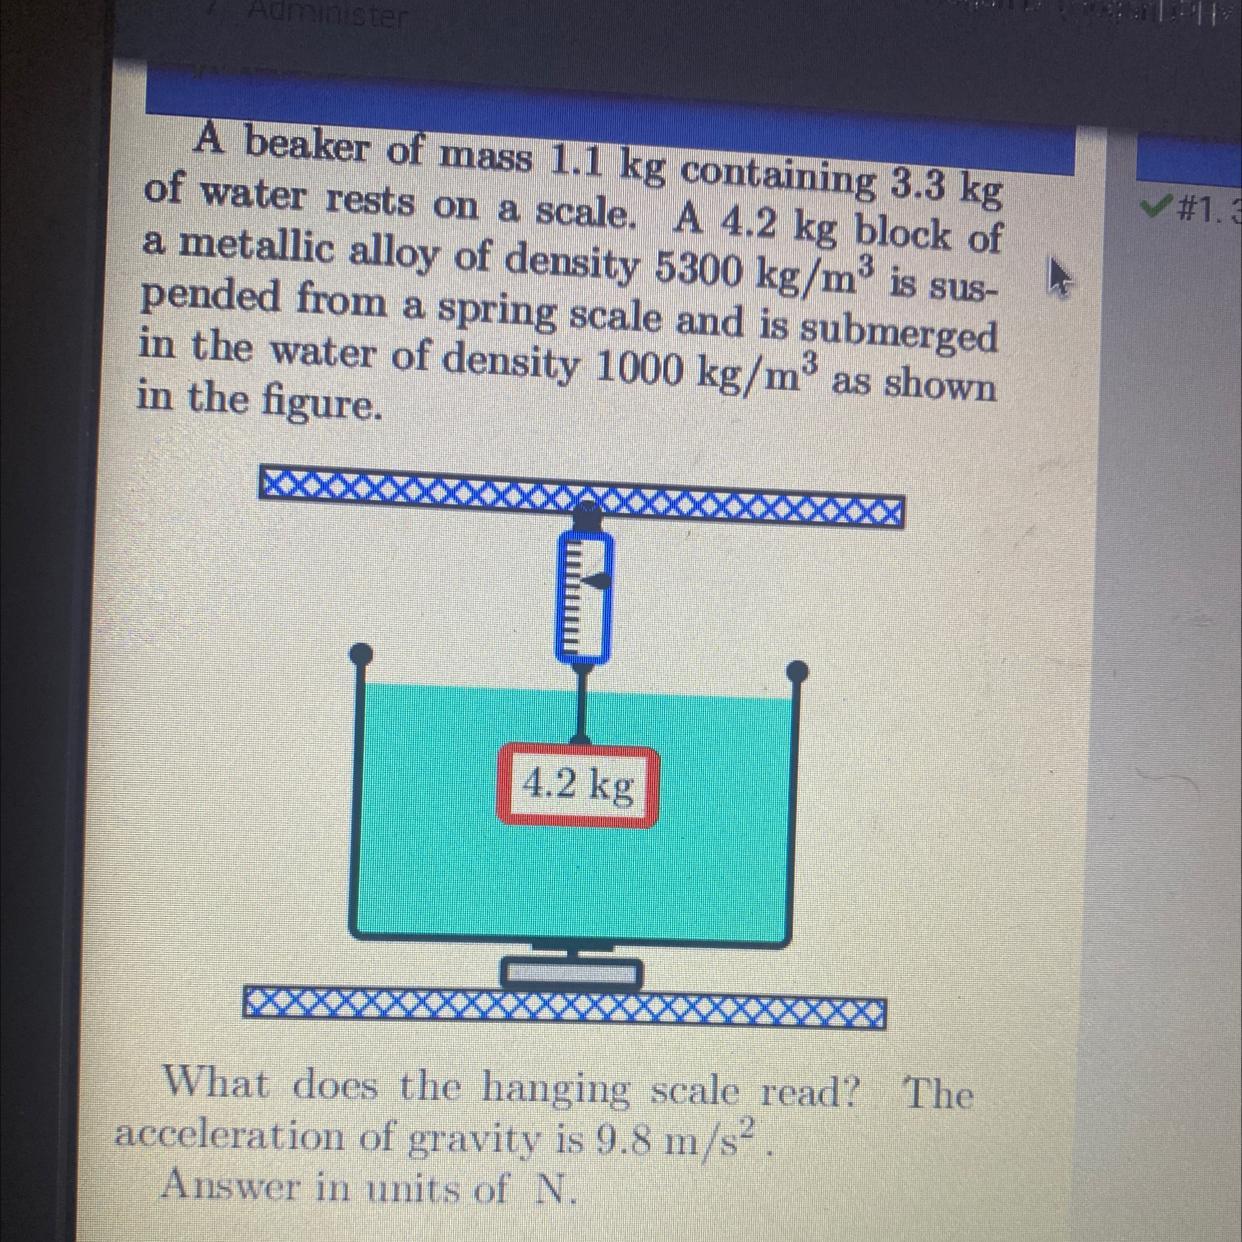 What Does The Lower Scale Read? Answer In Units Of N